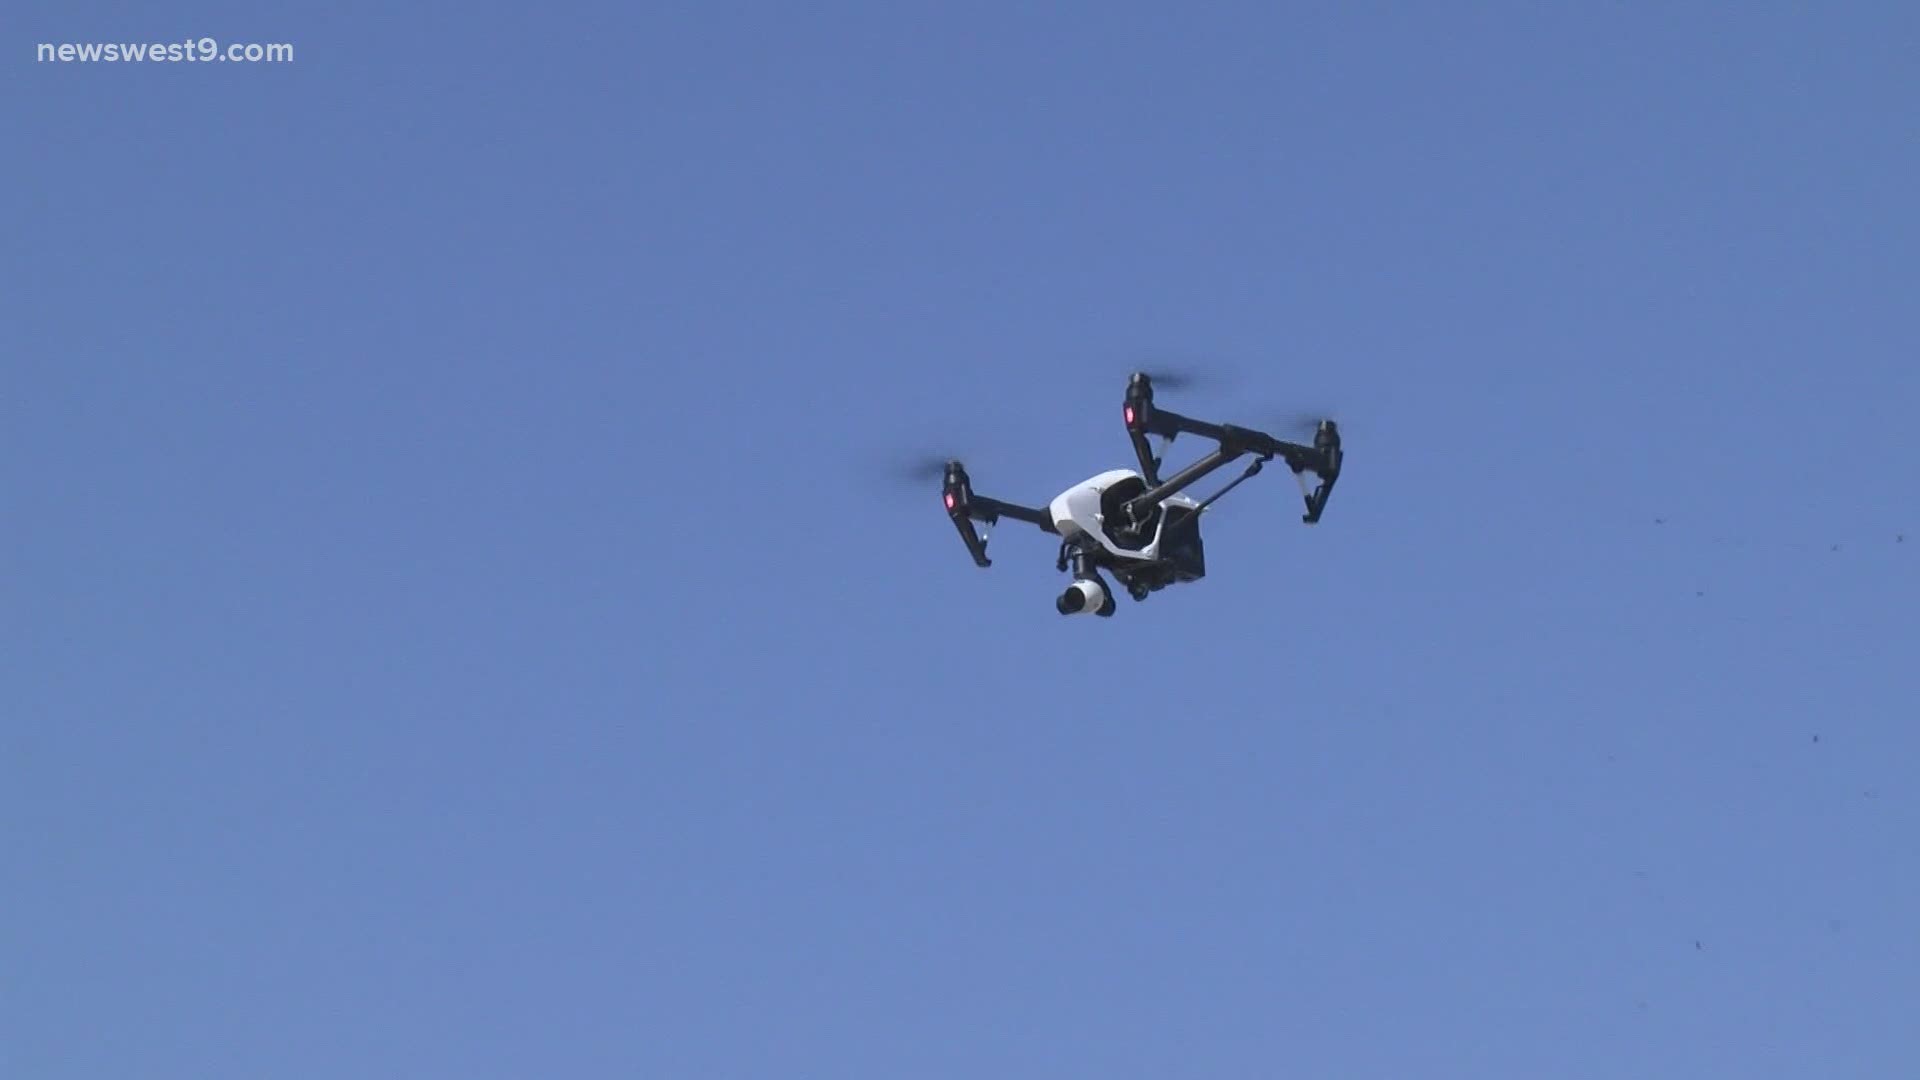 The new drone will help with responding to accidents, fire, and other types of emergencies.